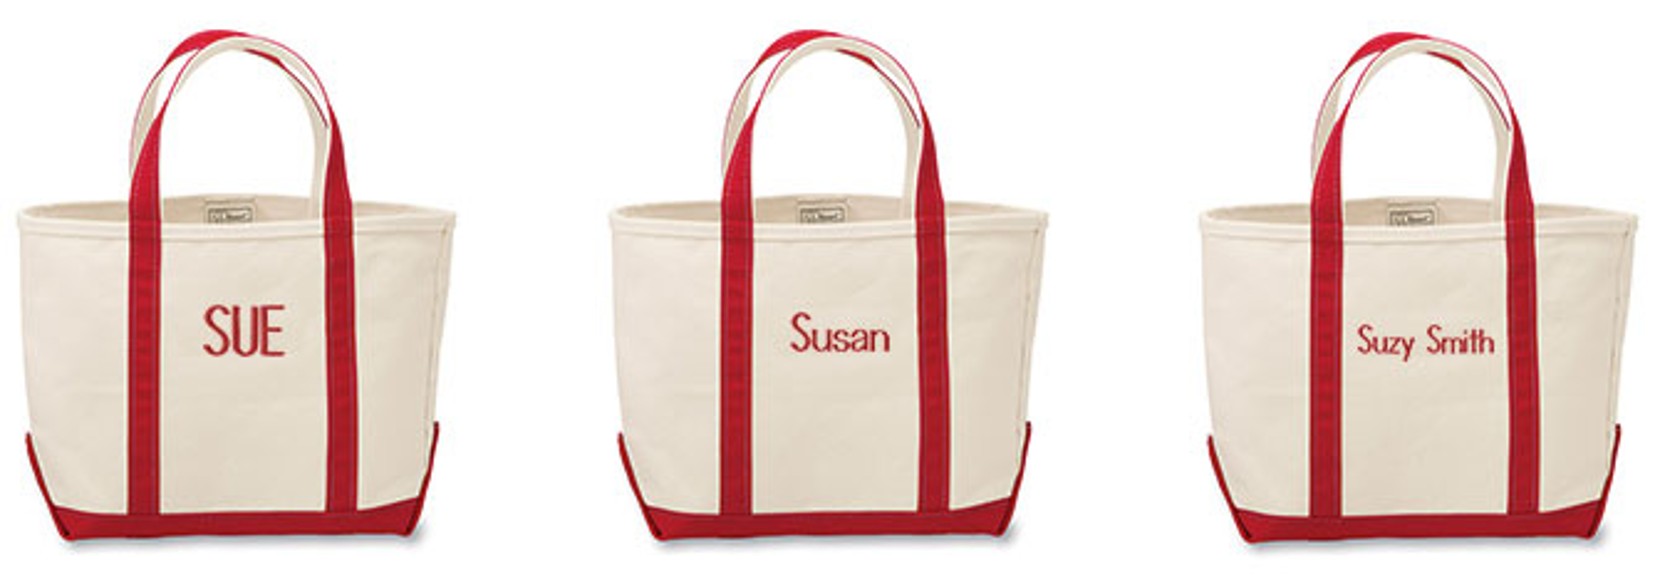 Image with examples of monograms on Boat and Tote bags.